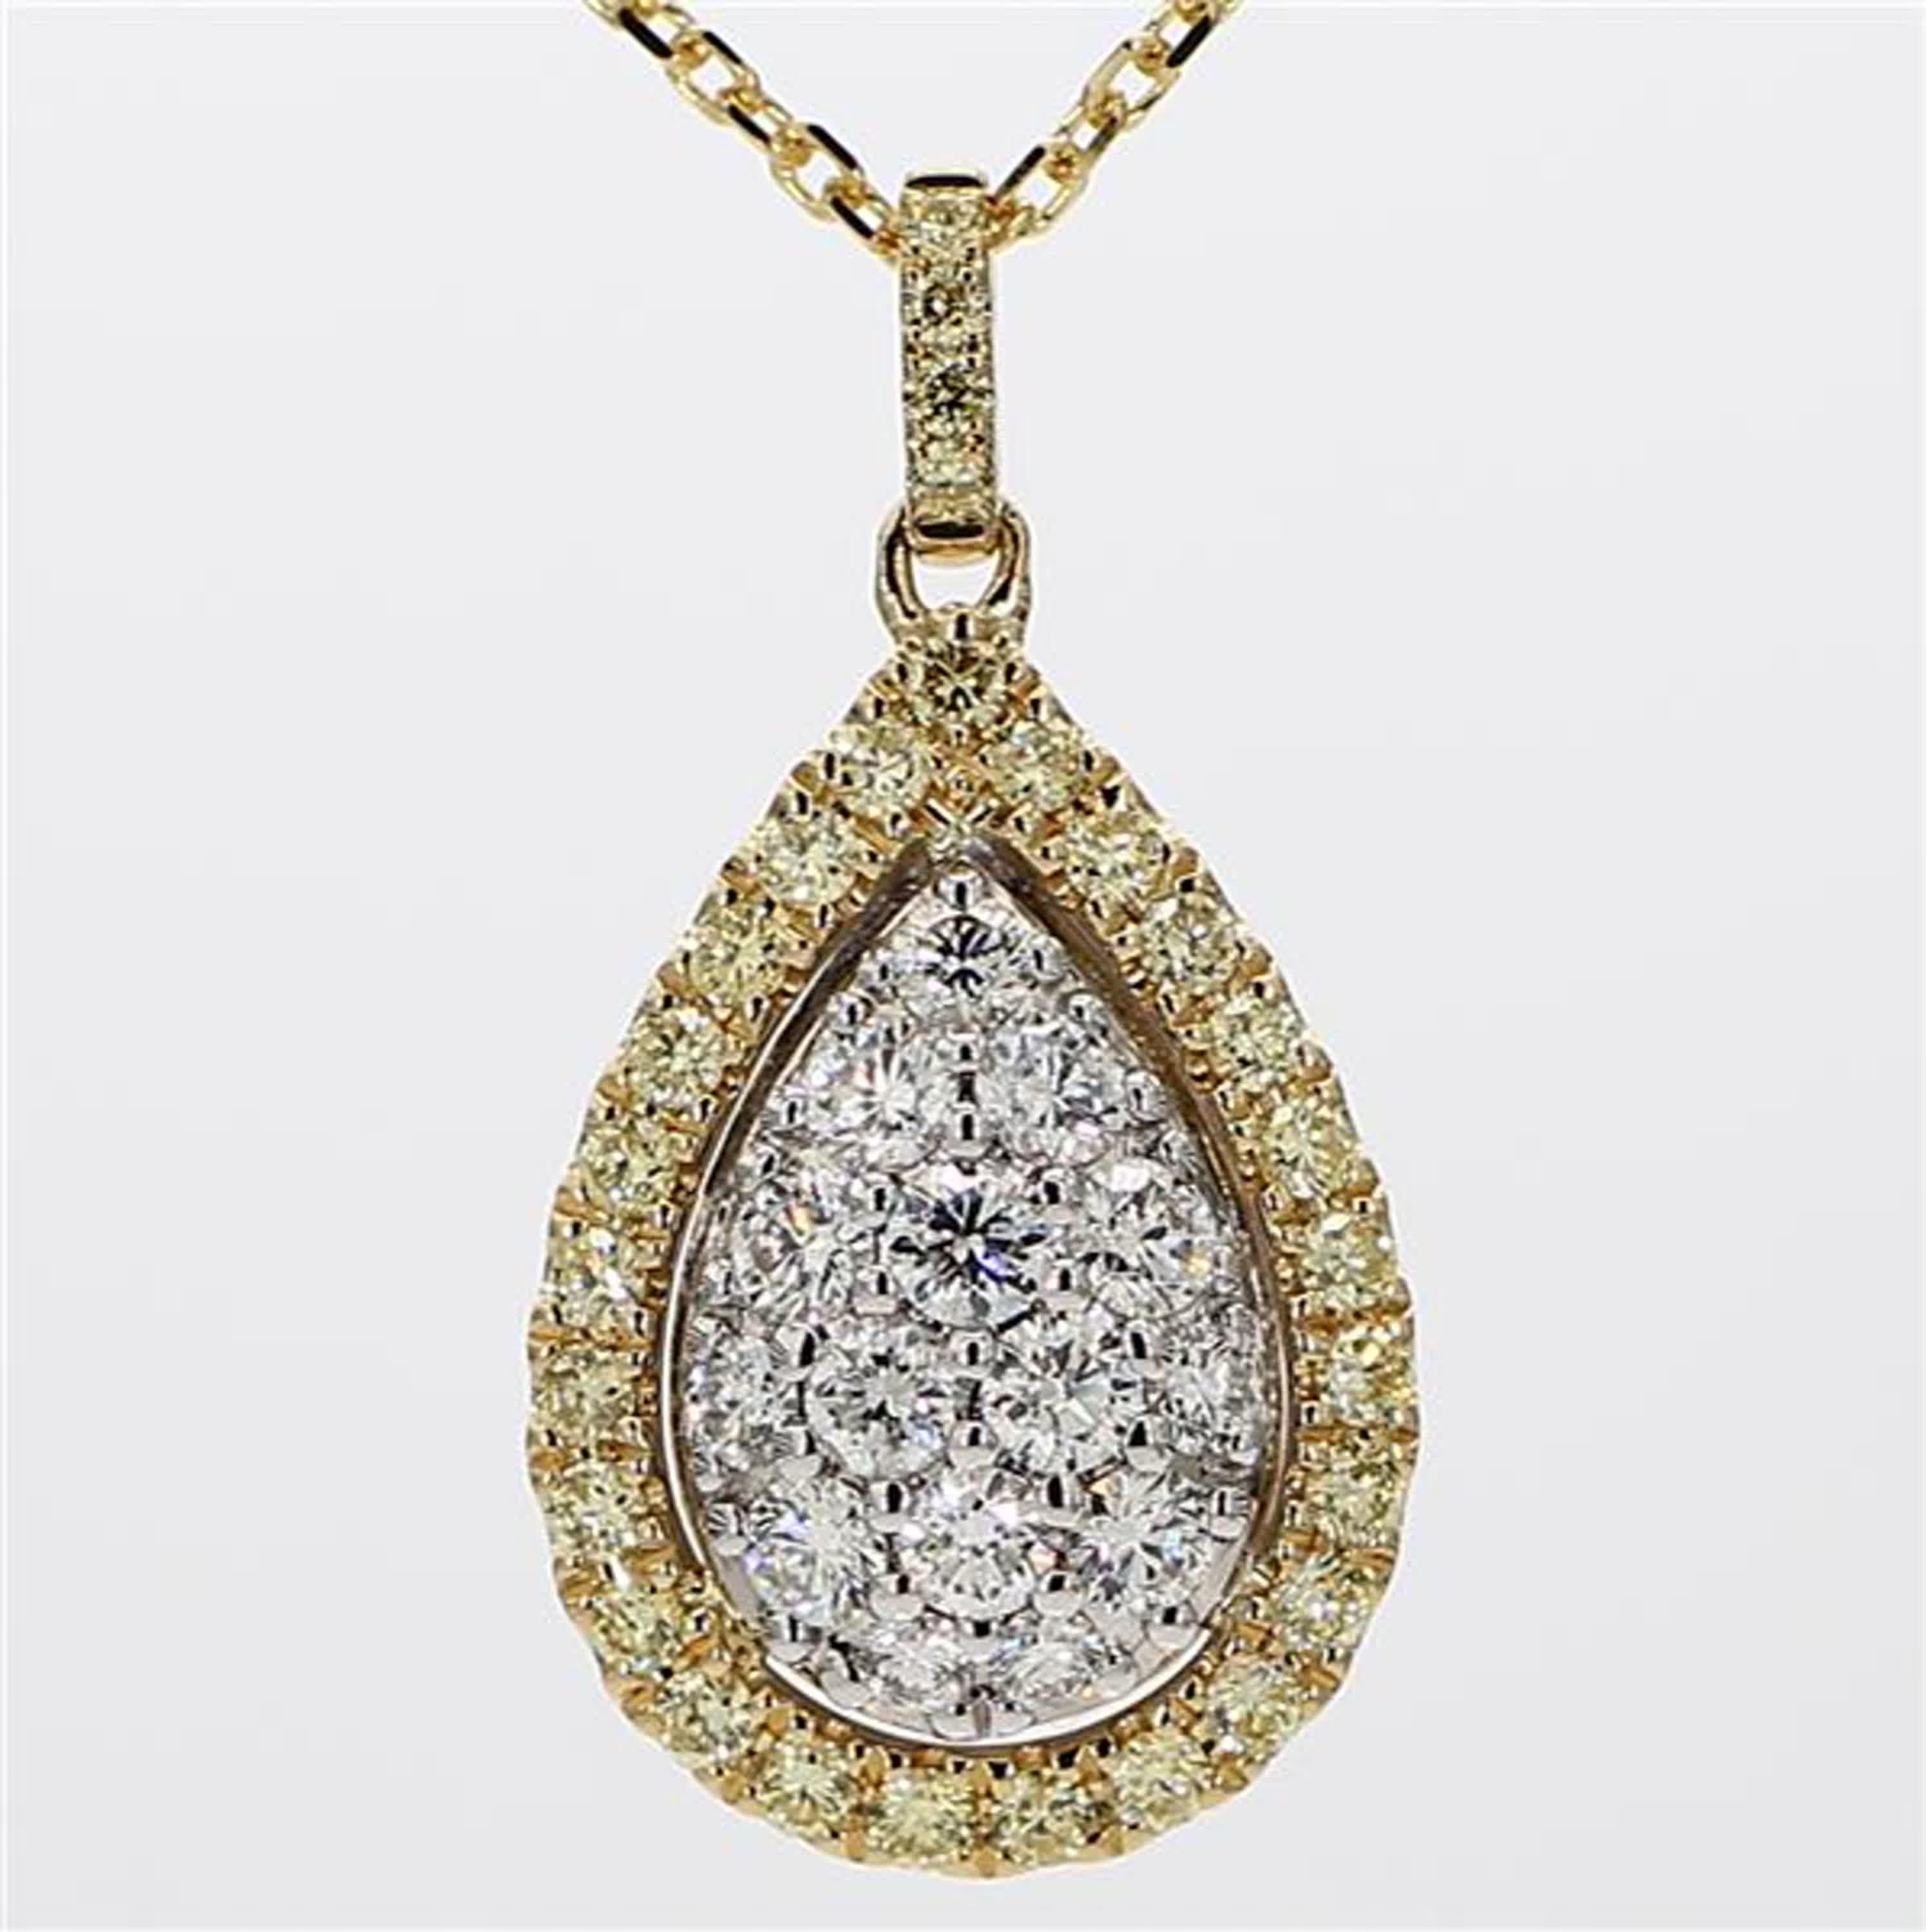 RareGemWorld's classic diamond pendant. Mounted in a beautiful 18K Yellow and White Gold setting with natural round yellow diamond melee complimented by natural round white diamond melee. This pendant is guaranteed to impress and enhance your